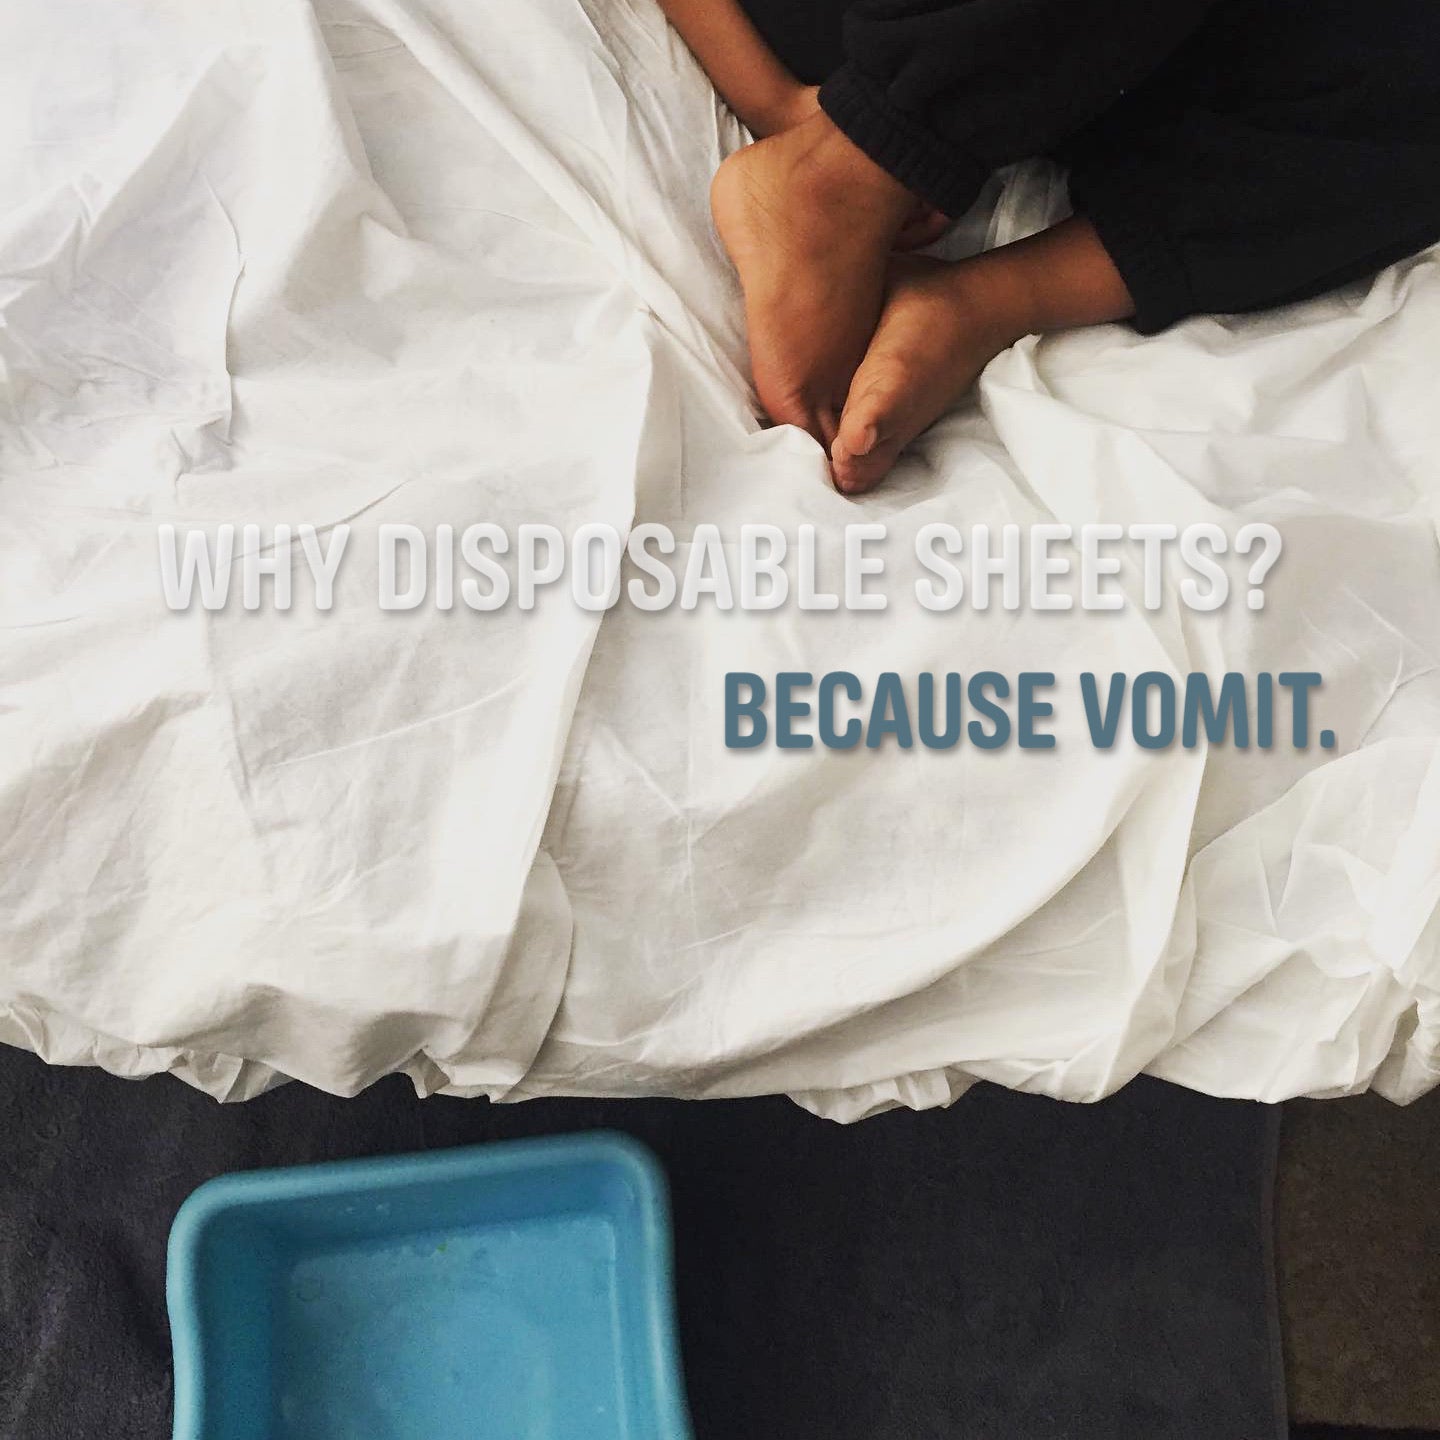 Vomit Diarrhea Daycare Sheets Absorbent Waterproof Soft Hypoallergenic Biodegradable Cross Contamination Disposable Crib Sheets Toddler Sheets Nap mats Hygienic Flu Reflux Vomit Throwup Puke Contagious Cleanup Quick  Inhome care in Home Pediatric Nurse 